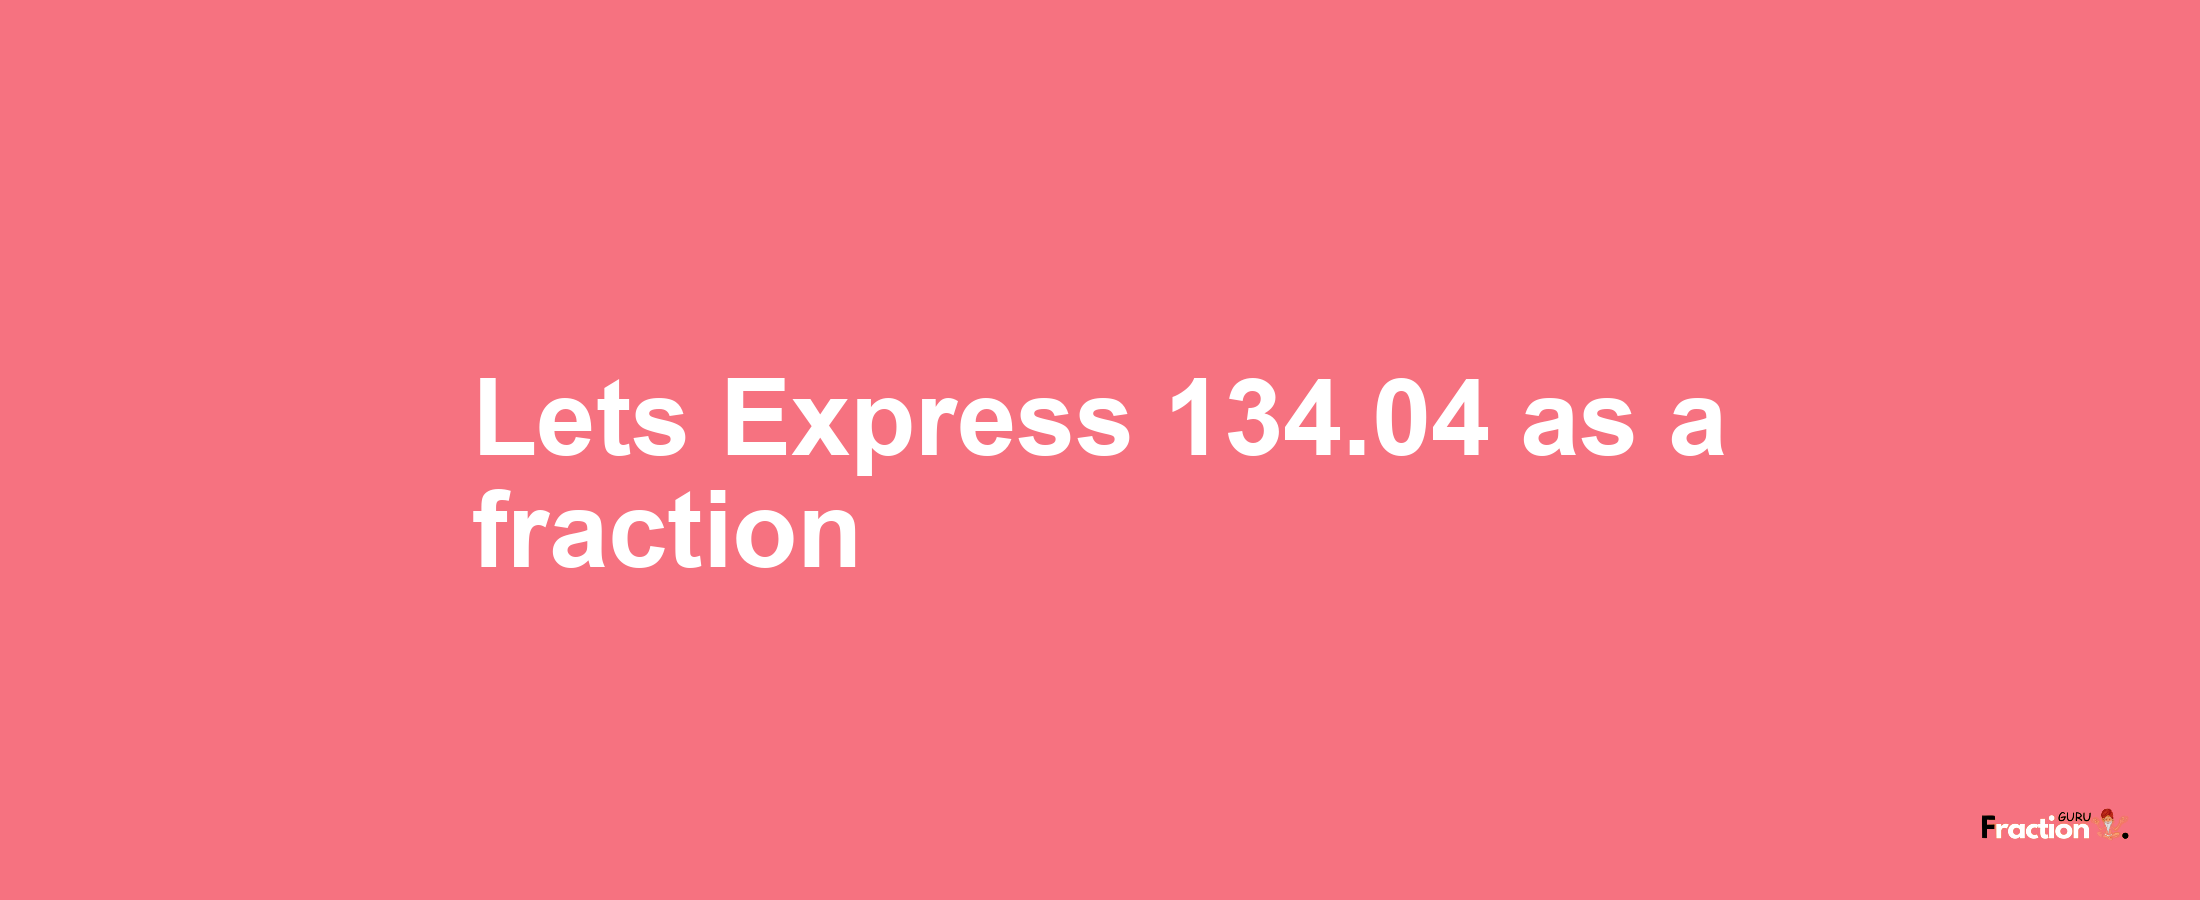 Lets Express 134.04 as afraction